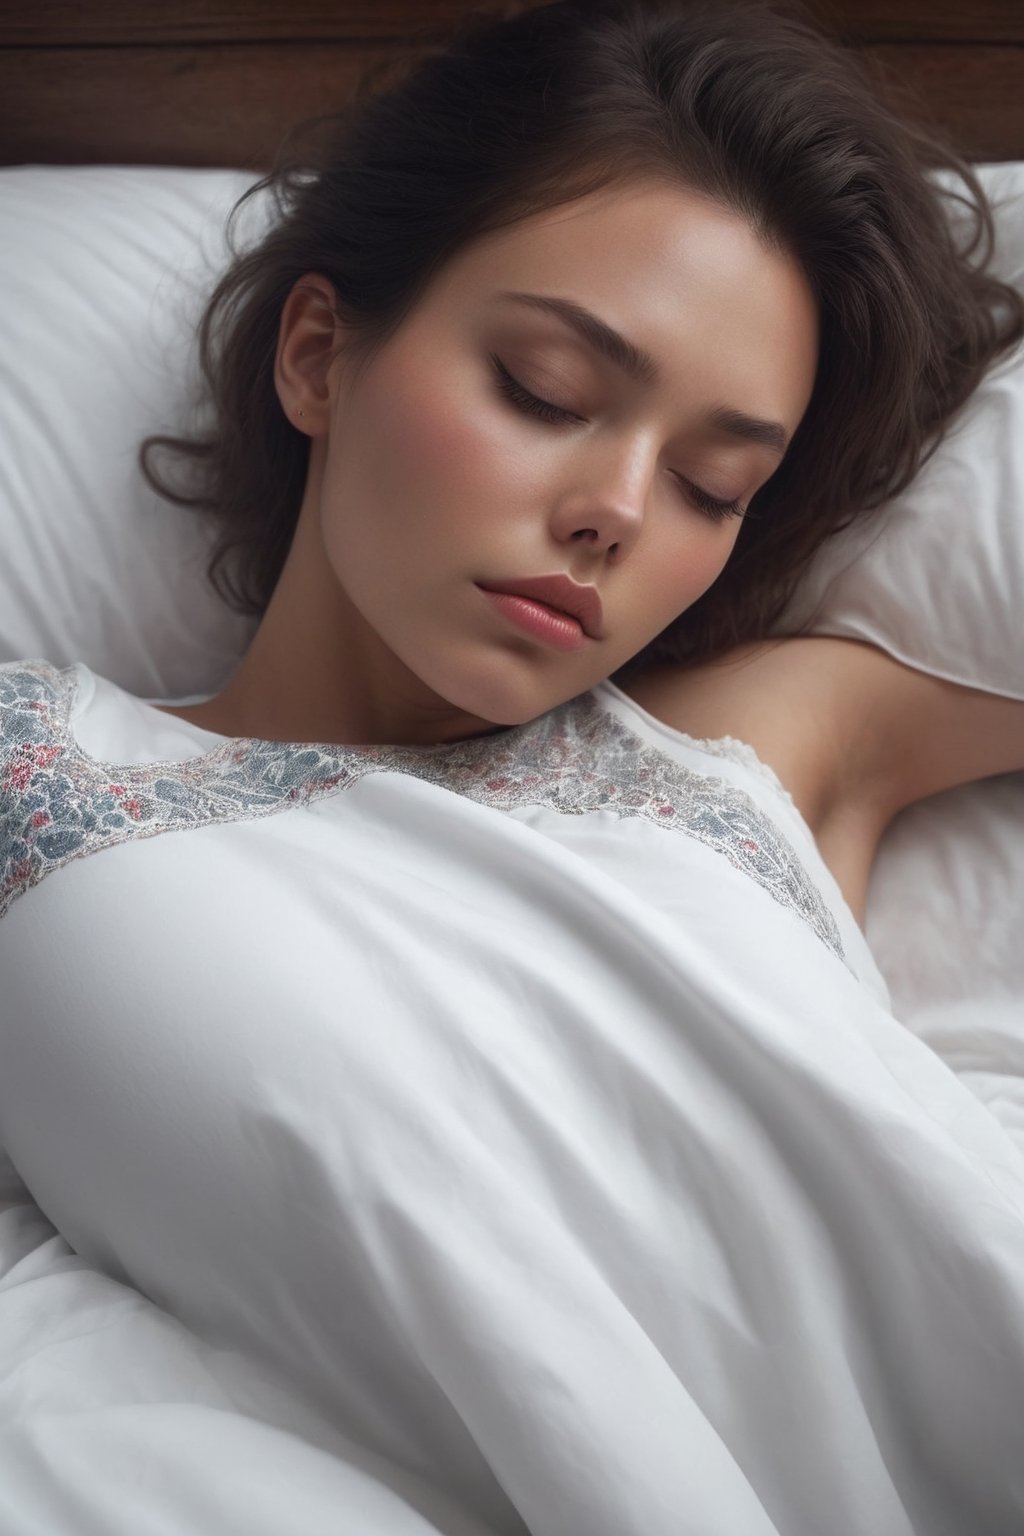 (1girl, eyes closed, sleep, laying on bed, cover herself with quilt, big white bed, no light in background), (face close-up, focus ob face), masterpiece, UHD, realism, realistic, depth of field, raytraced, medium breast, mystical, luminous, high resolution, sharp details, translucent, beautiful, stunning, a mythical being exuding energy, textures, breathtaking beauty, pure perfection, with a divine presence, unforgettable, and impressive.